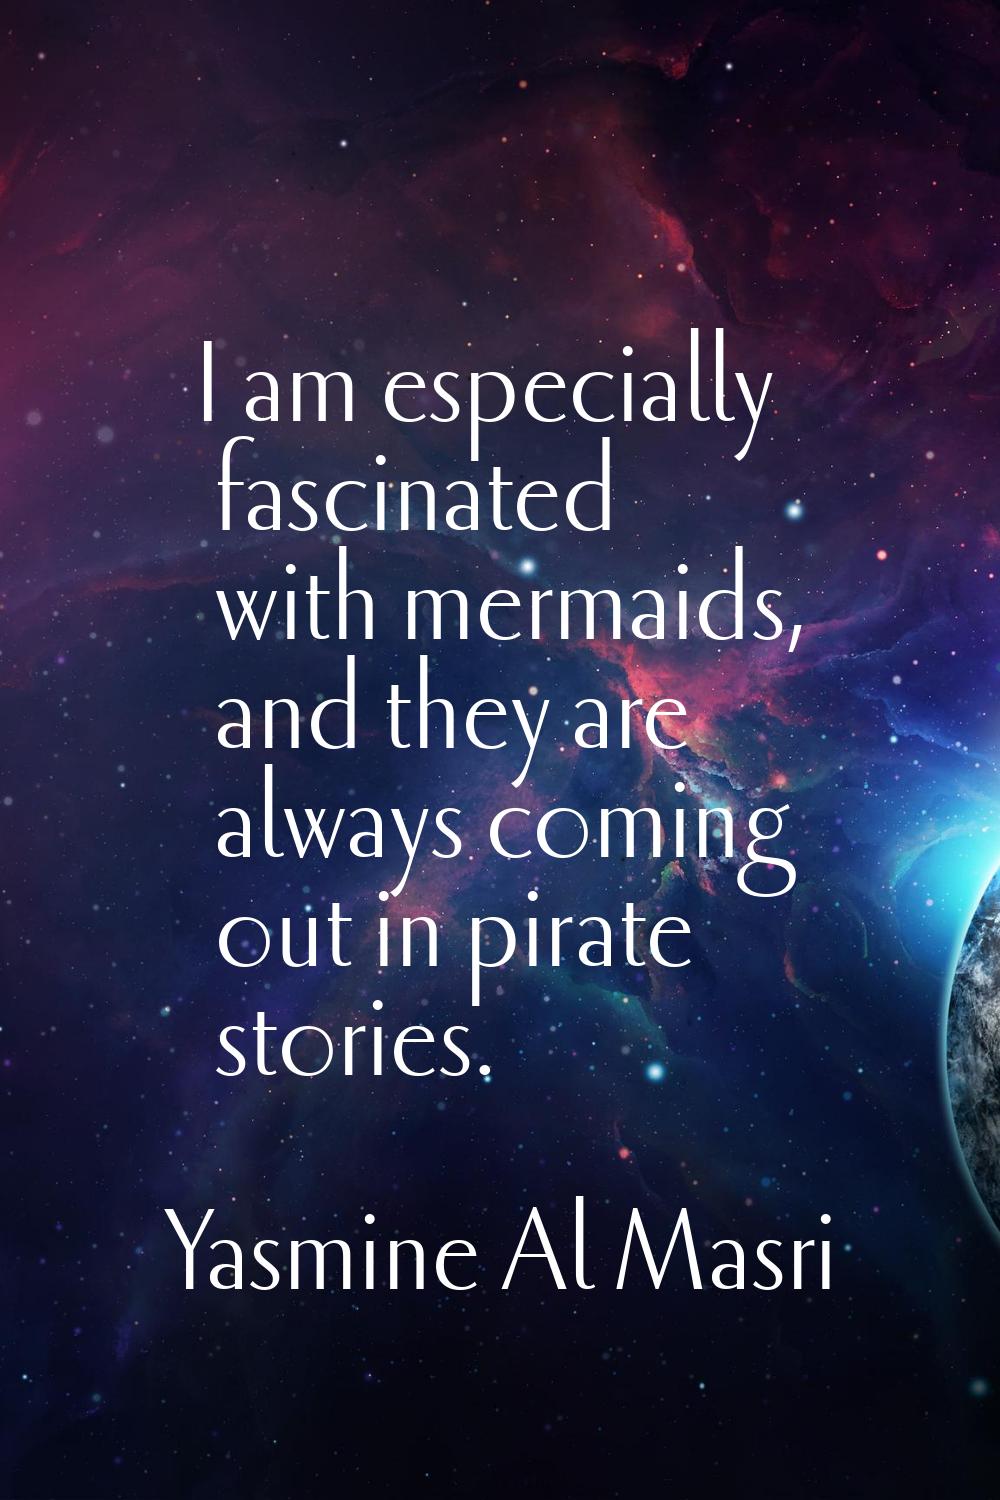 I am especially fascinated with mermaids, and they are always coming out in pirate stories.